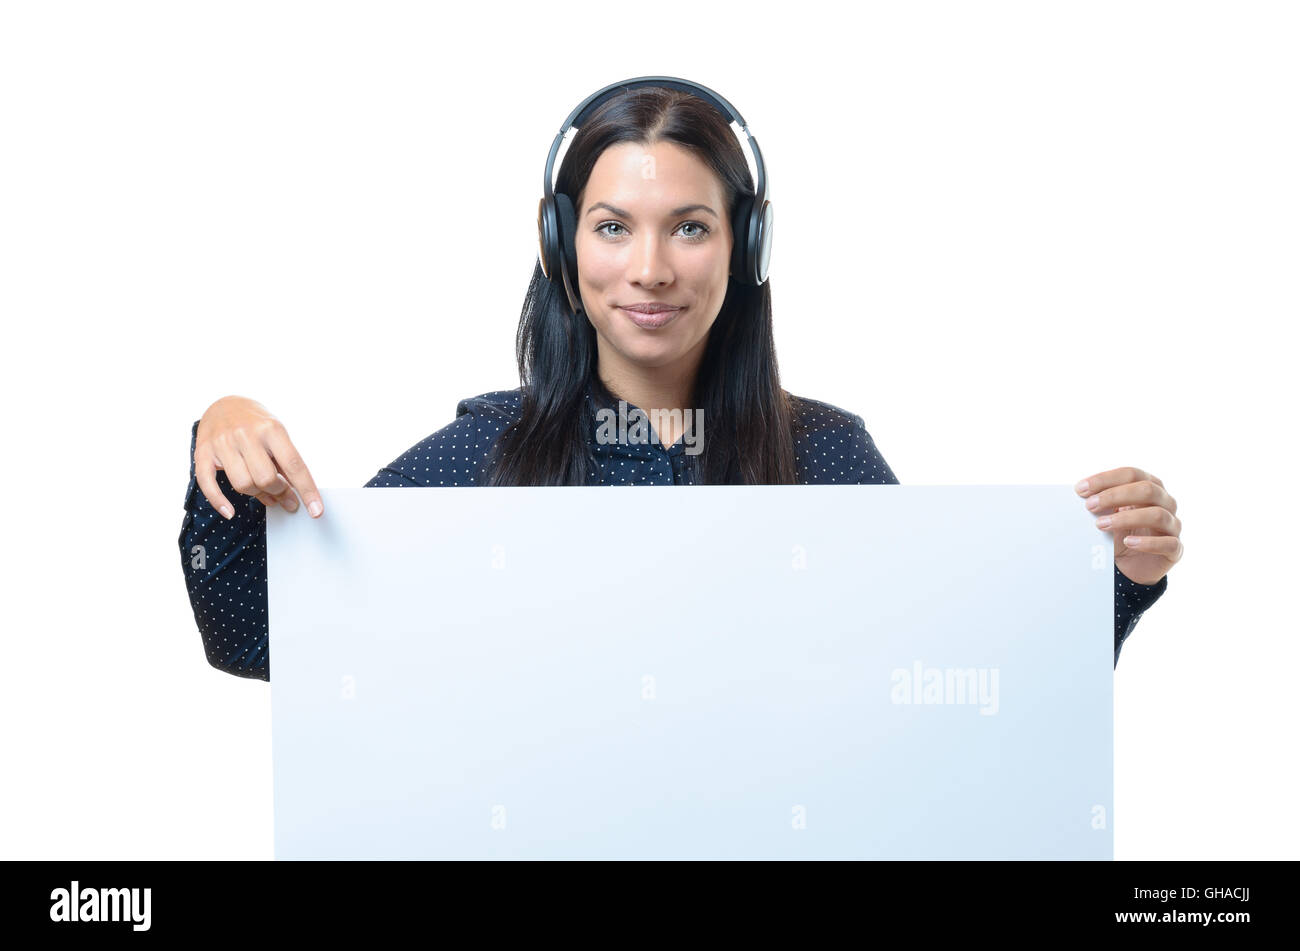 Young woman wearing a headset holding a blank white rectangular sign board or placard with copy space in front of her chest, iso Stock Photo